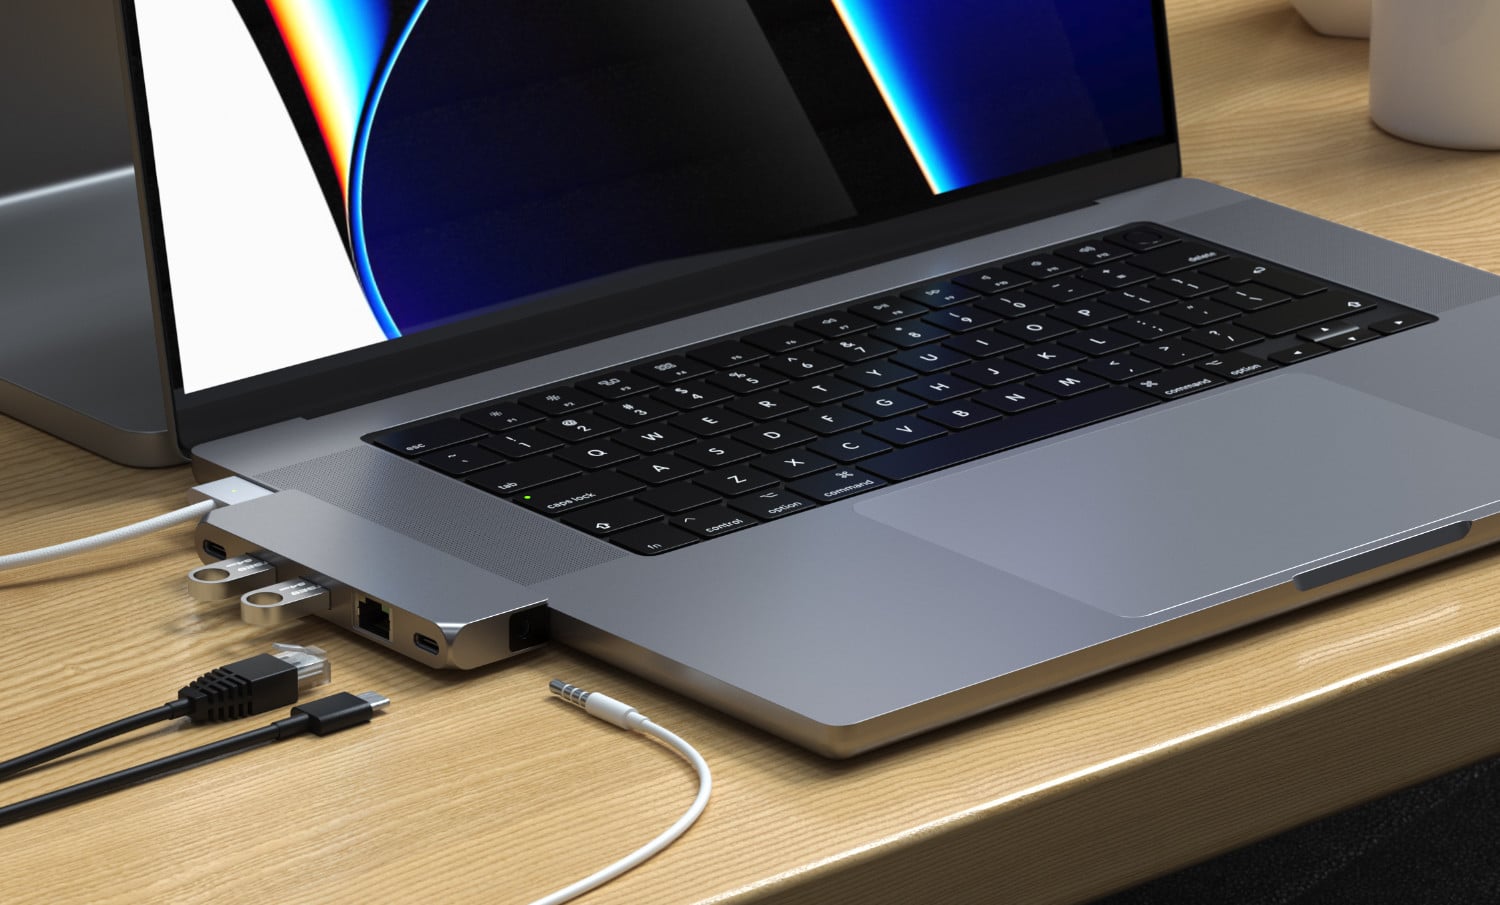 Apple | Satechi: Two new hubs released for the 2021 M1 MacBook Pro | macbook | Satechi Pro Hub Mini